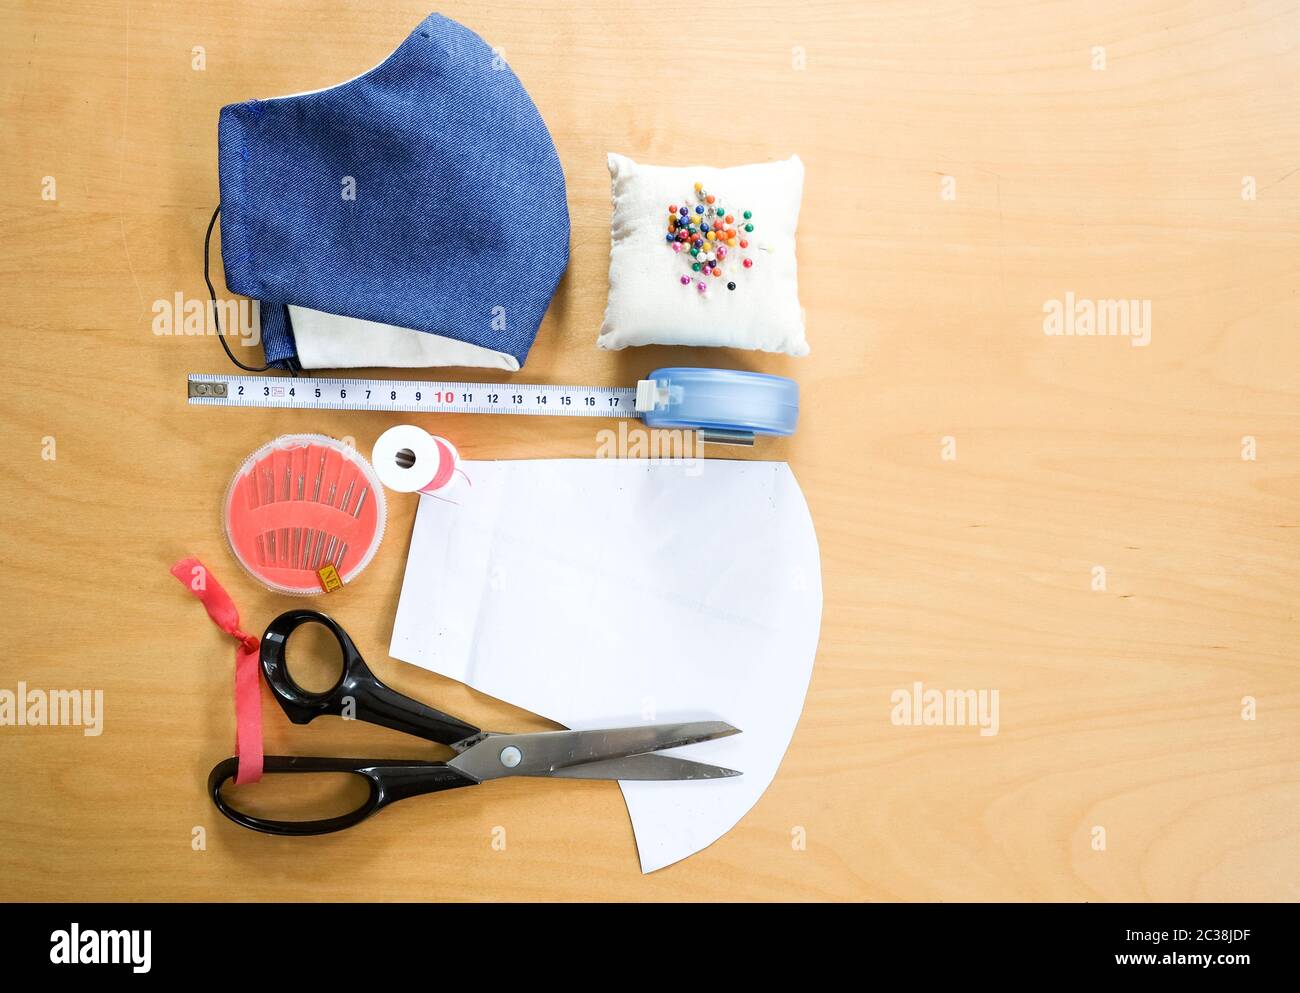 Tabletop view of sewing equipment to make your own protective Coronavirus face mask, wooden background, needlecraft DIY project. Stock Photo